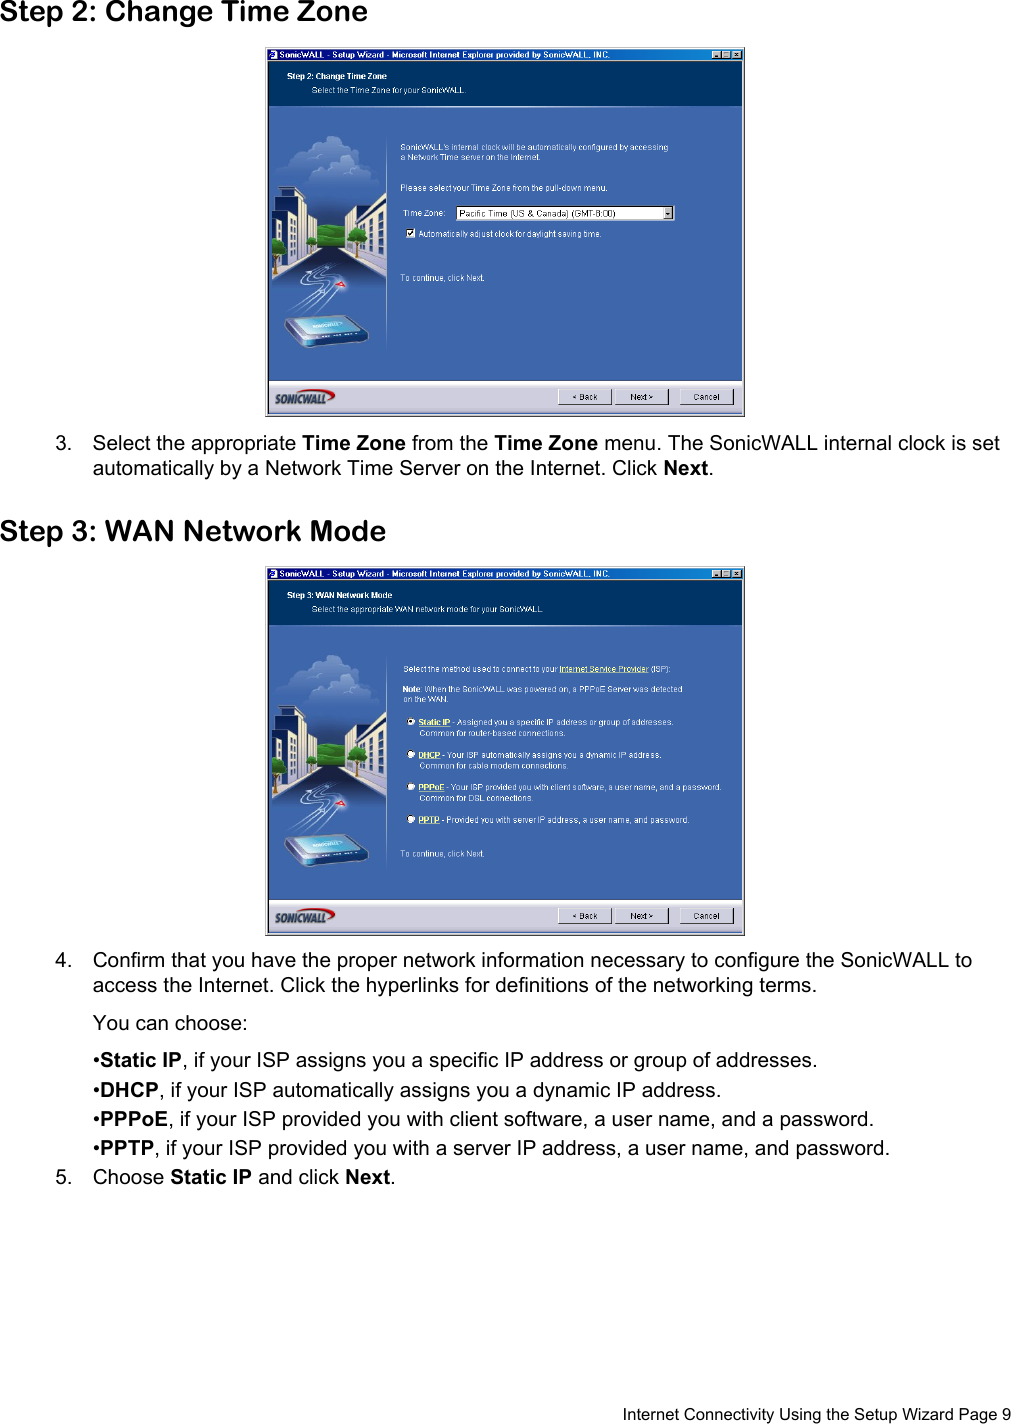  Internet Connectivity Using the Setup Wizard Page 9Step 2: Change Time Zone3. Select the appropriate Time Zone from the Time Zone menu. The SonicWALL internal clock is set automatically by a Network Time Server on the Internet. Click Next.Step 3: WAN Network Mode4. Confirm that you have the proper network information necessary to configure the SonicWALL to access the Internet. Click the hyperlinks for definitions of the networking terms. You can choose:•Static IP, if your ISP assigns you a specific IP address or group of addresses.•DHCP, if your ISP automatically assigns you a dynamic IP address.•PPPoE, if your ISP provided you with client software, a user name, and a password.•PPTP, if your ISP provided you with a server IP address, a user name, and password. 5. Choose Static IP and click Next.